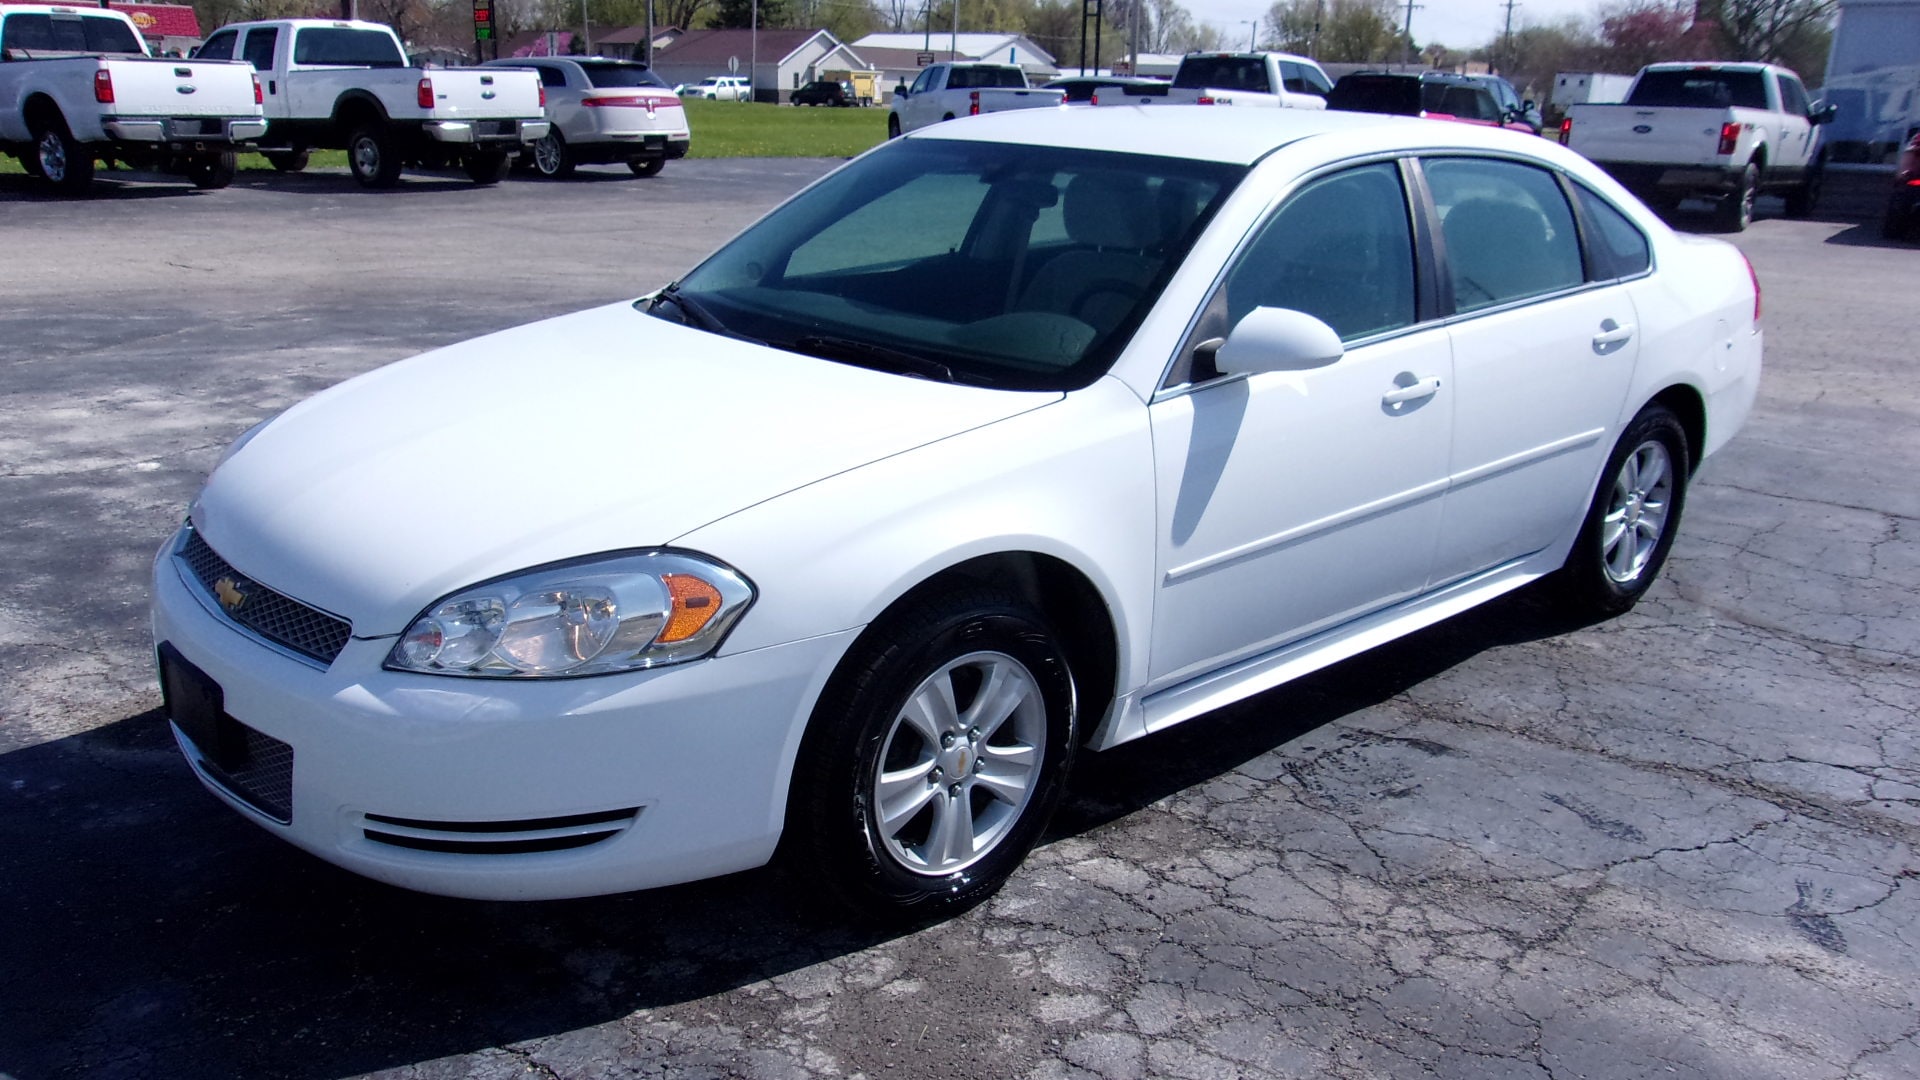 Used 2015 Chevrolet Impala Limited 1FL with VIN 2G1WA5E32F1171412 for sale in Carthage, IL